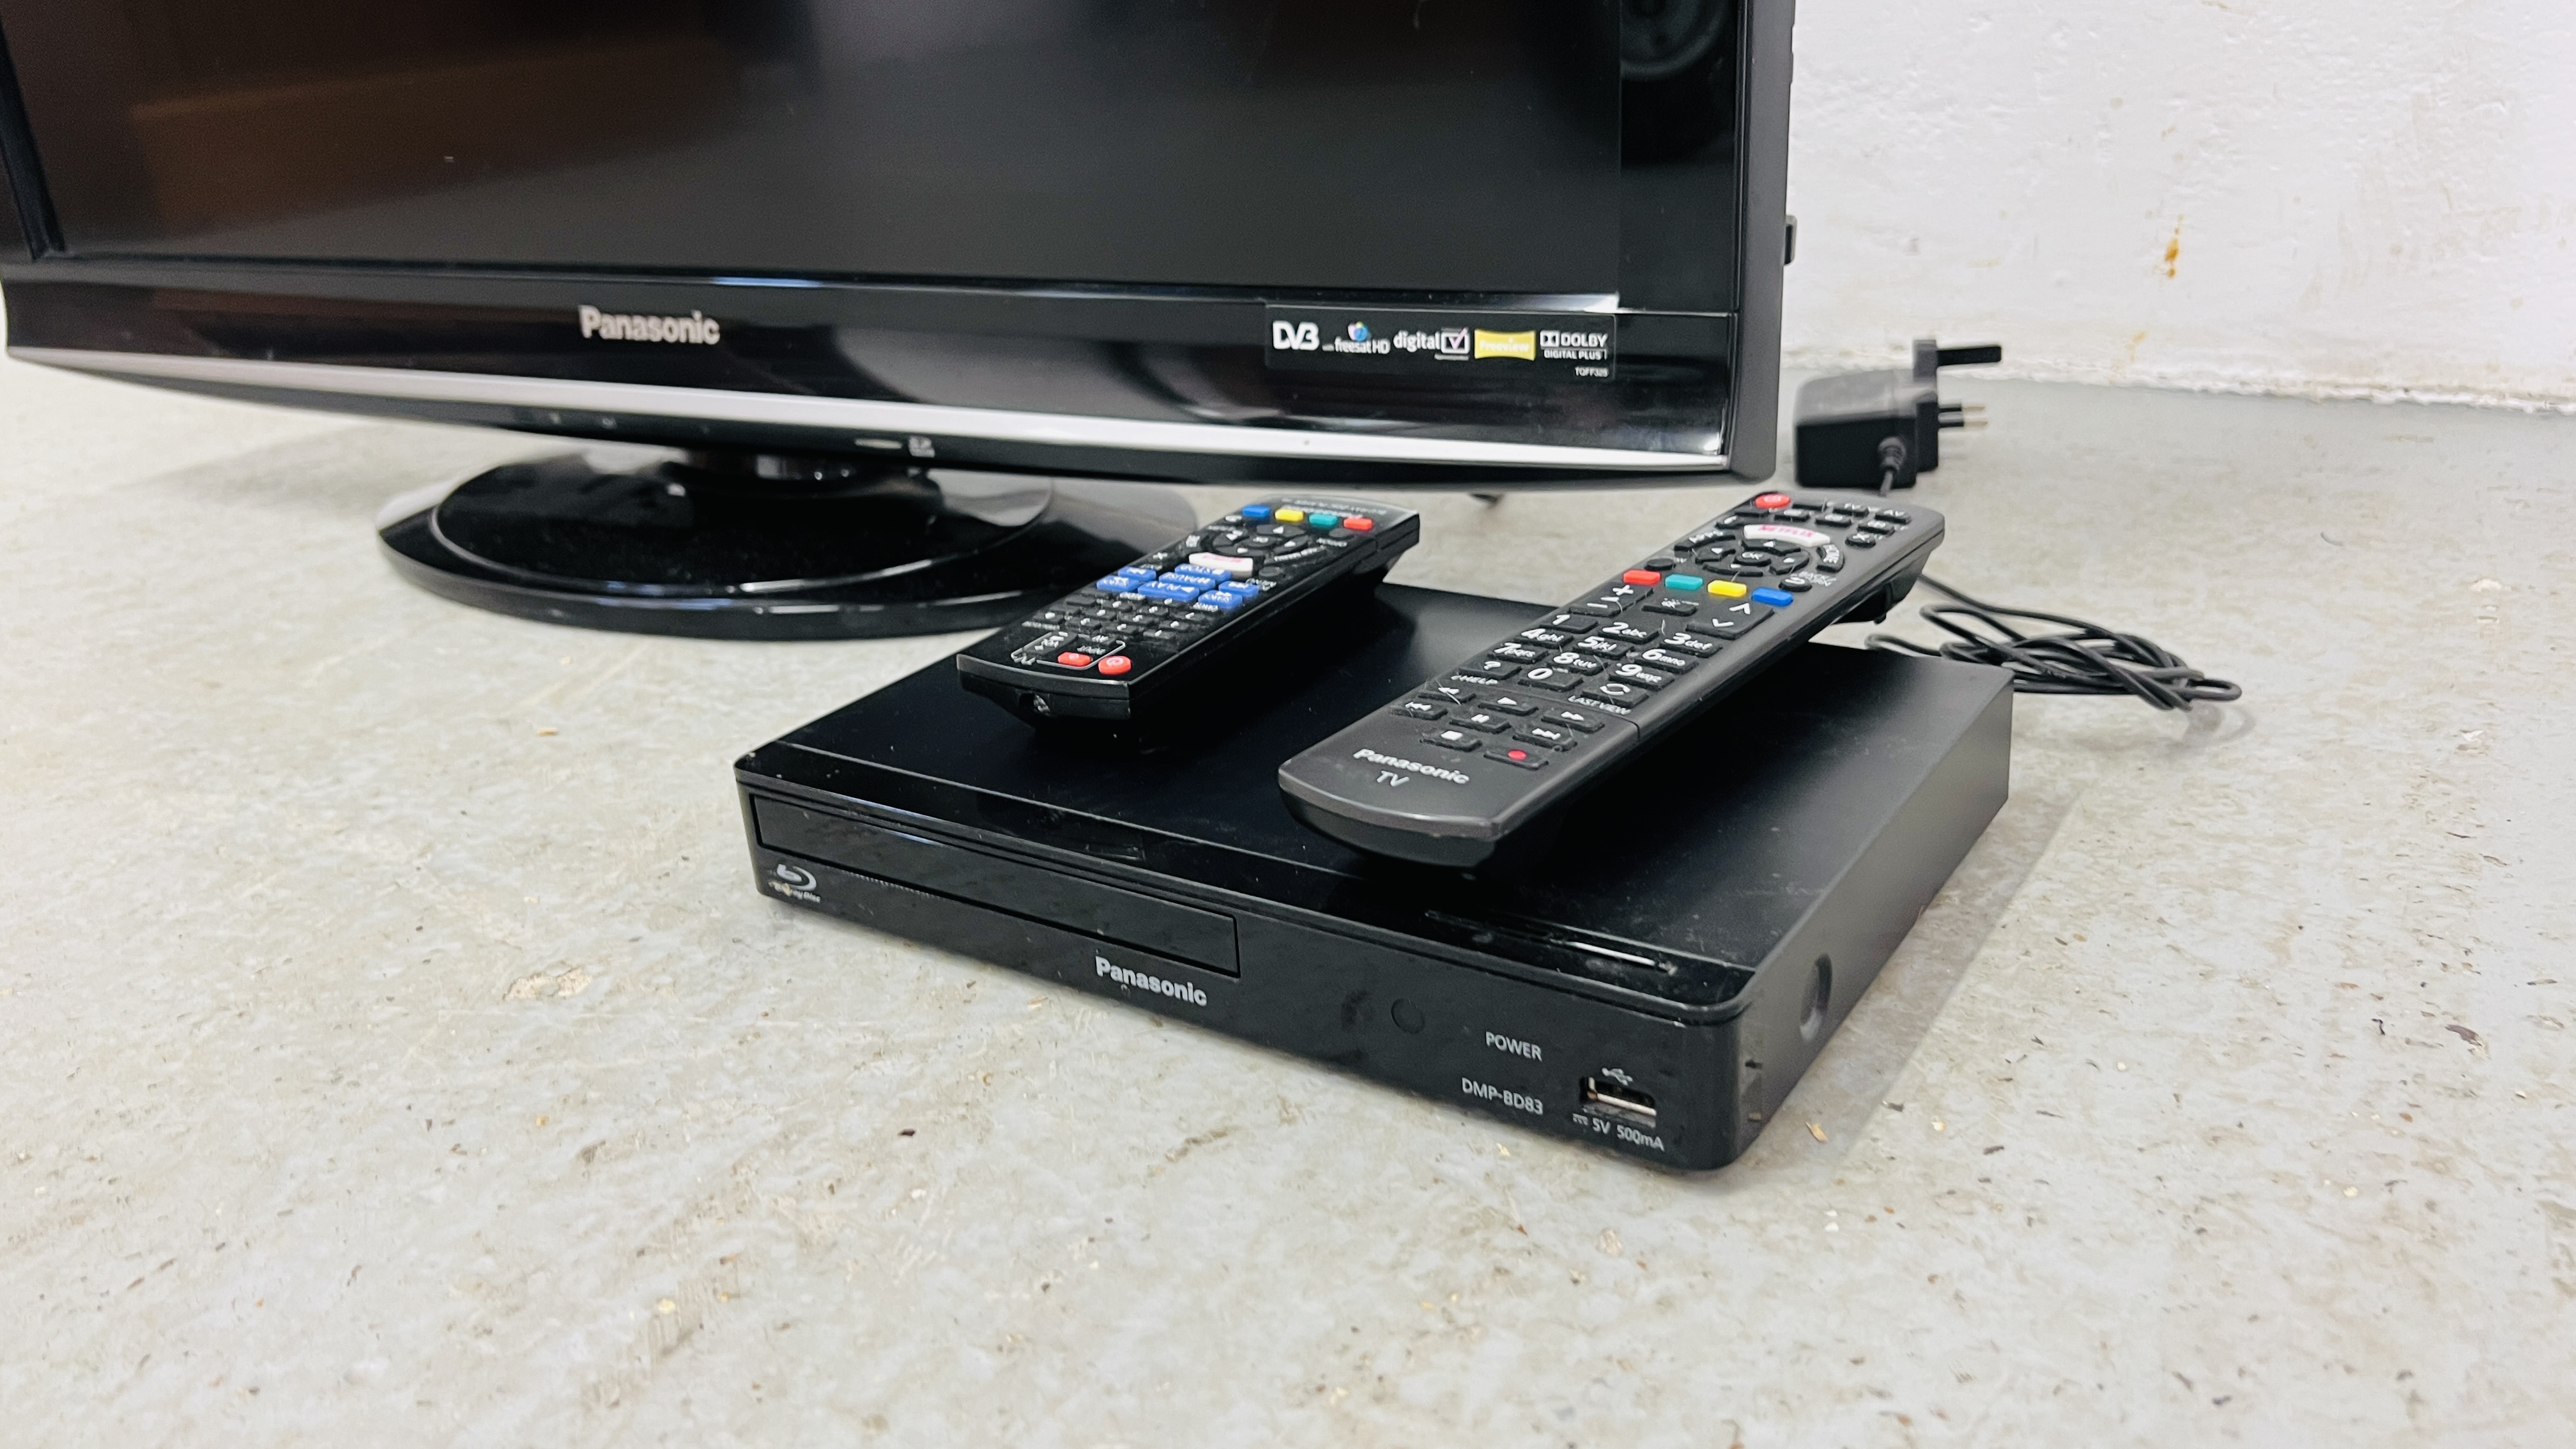 A PANASONIC VIERA 32 INCH TELEVISION AND PANASONIC BLU-RAY DISC PLAYER COMPLETE WITH REMOTES - SOLD - Image 3 of 3